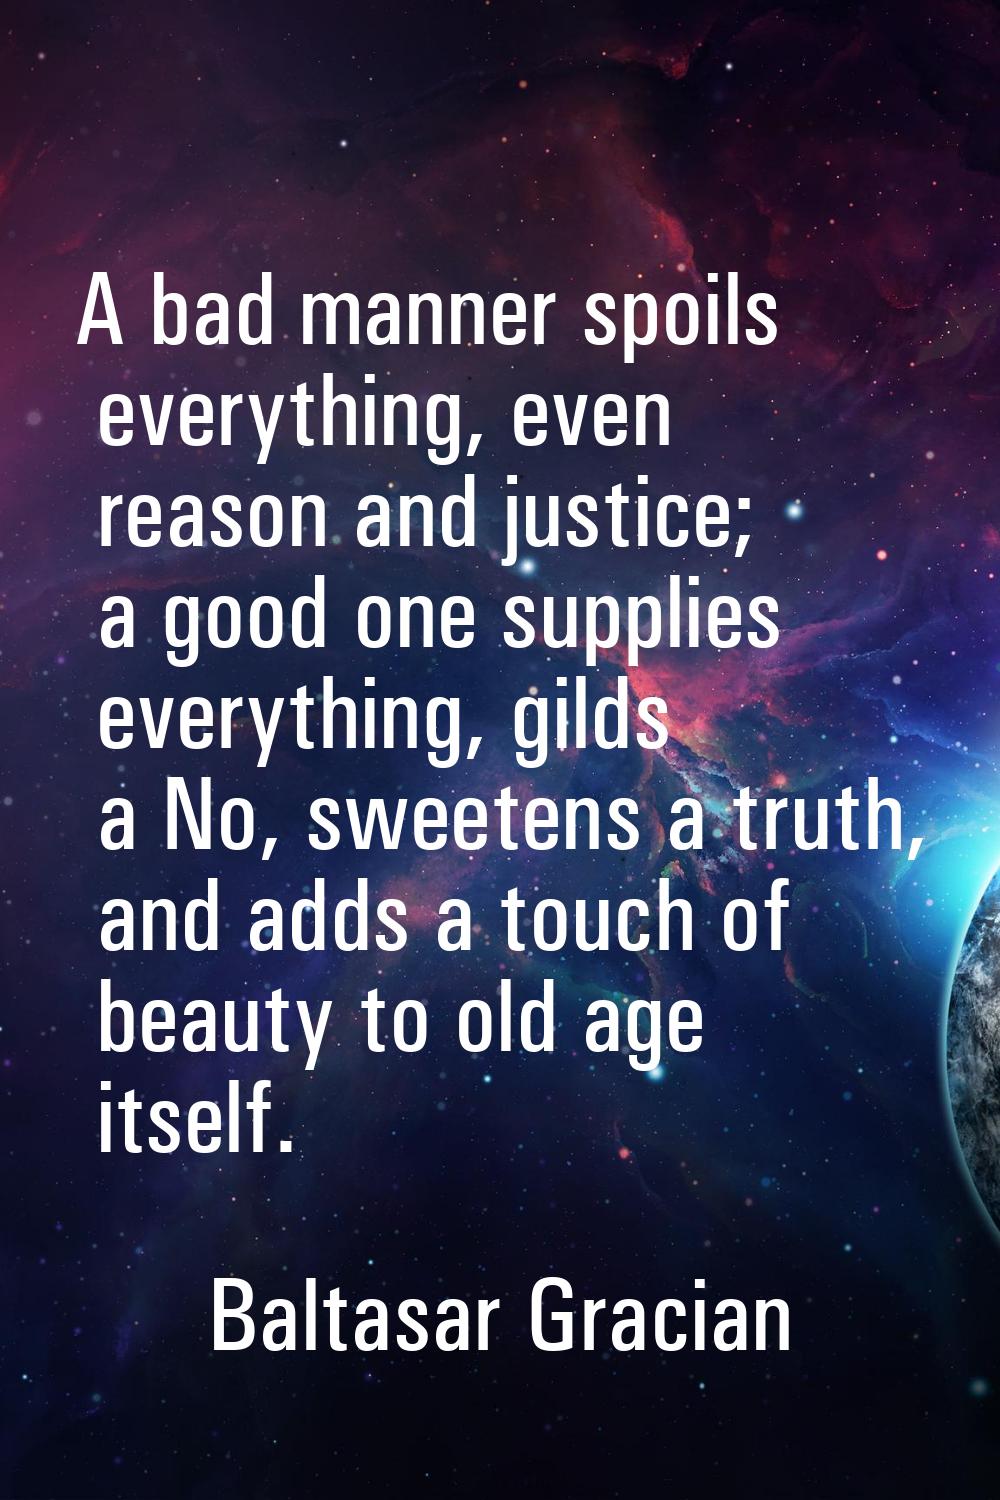 A bad manner spoils everything, even reason and justice; a good one supplies everything, gilds a No